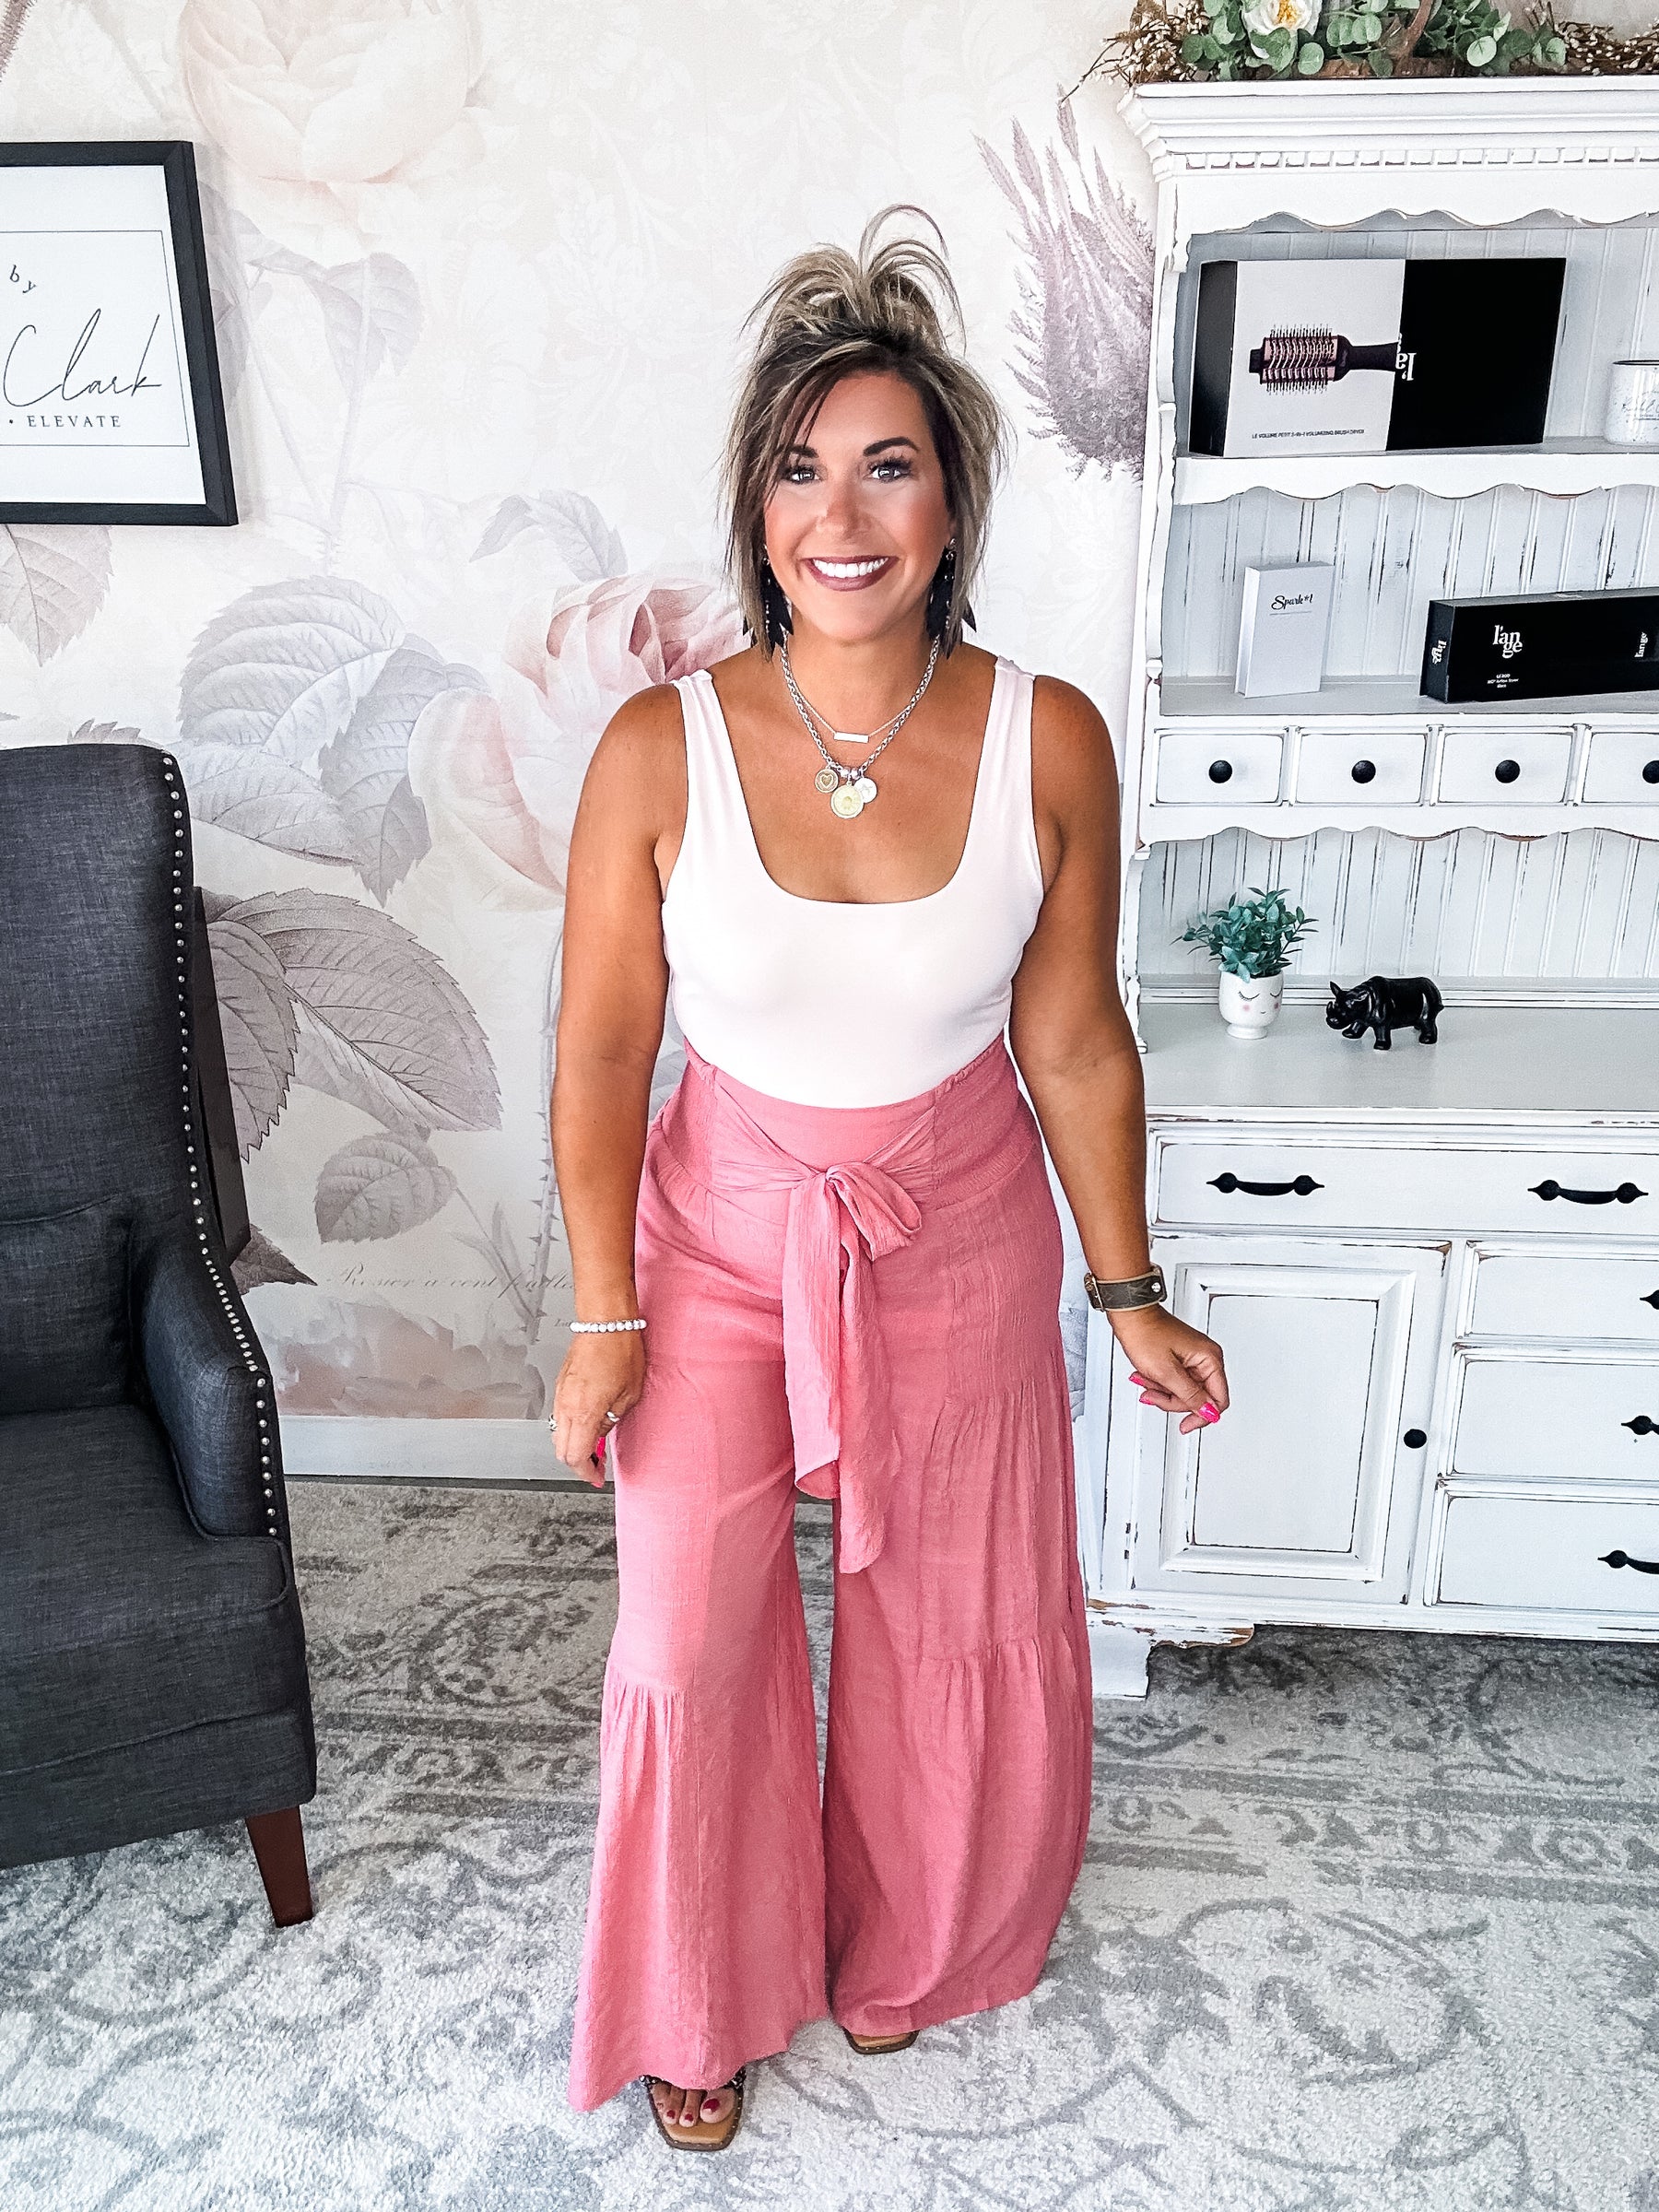 Ampersand Avenue Tiered Boho Pants - Pink